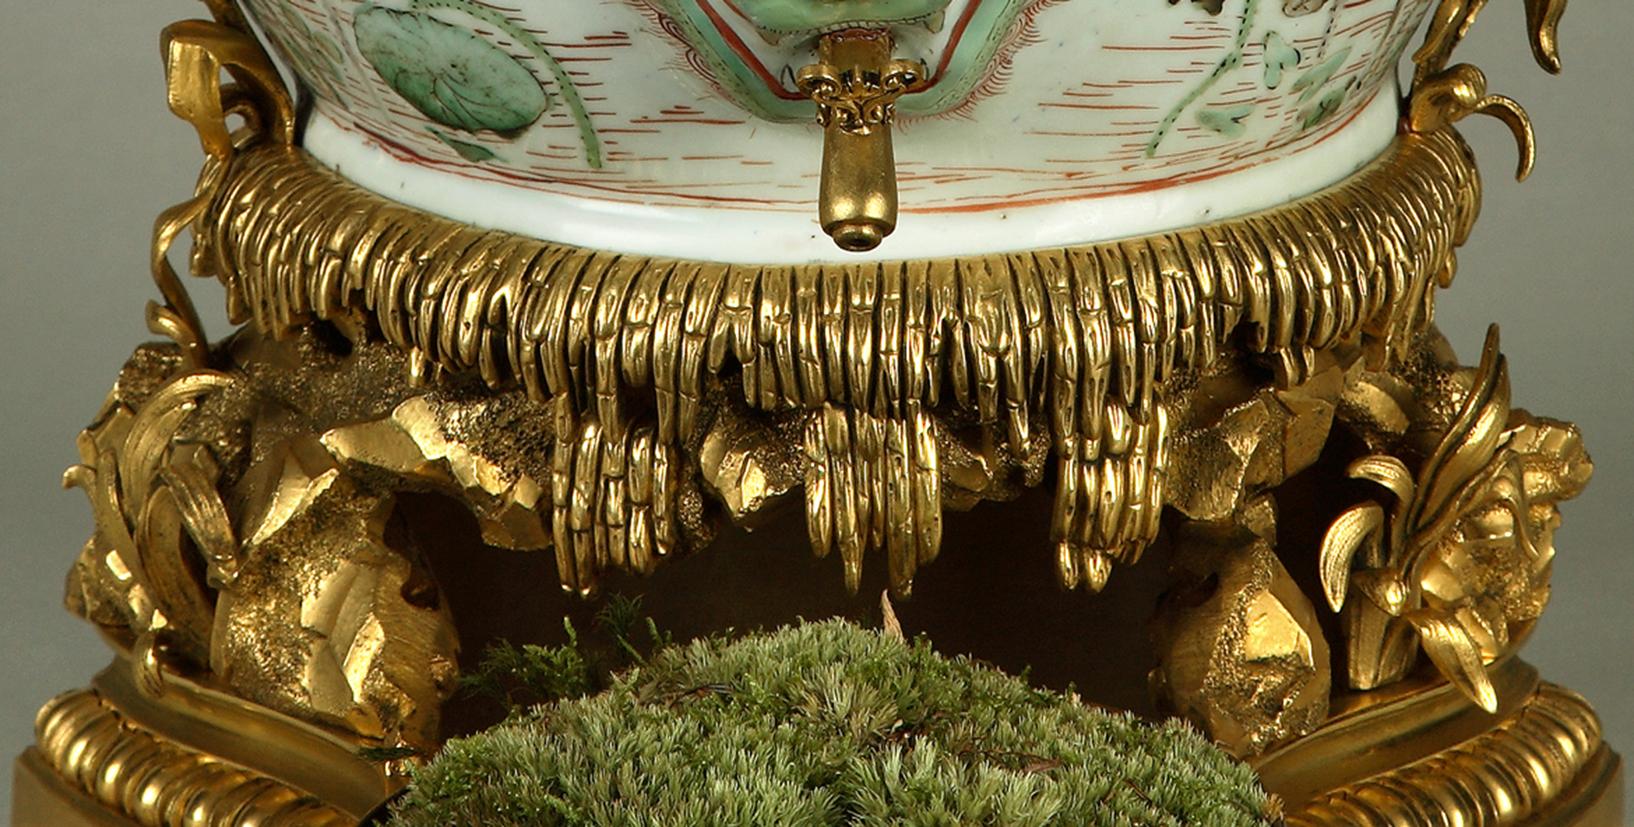 French Chinese Porcelain Mural Fountain Attributed to L'Escalier de Cristal, c. 1880 For Sale